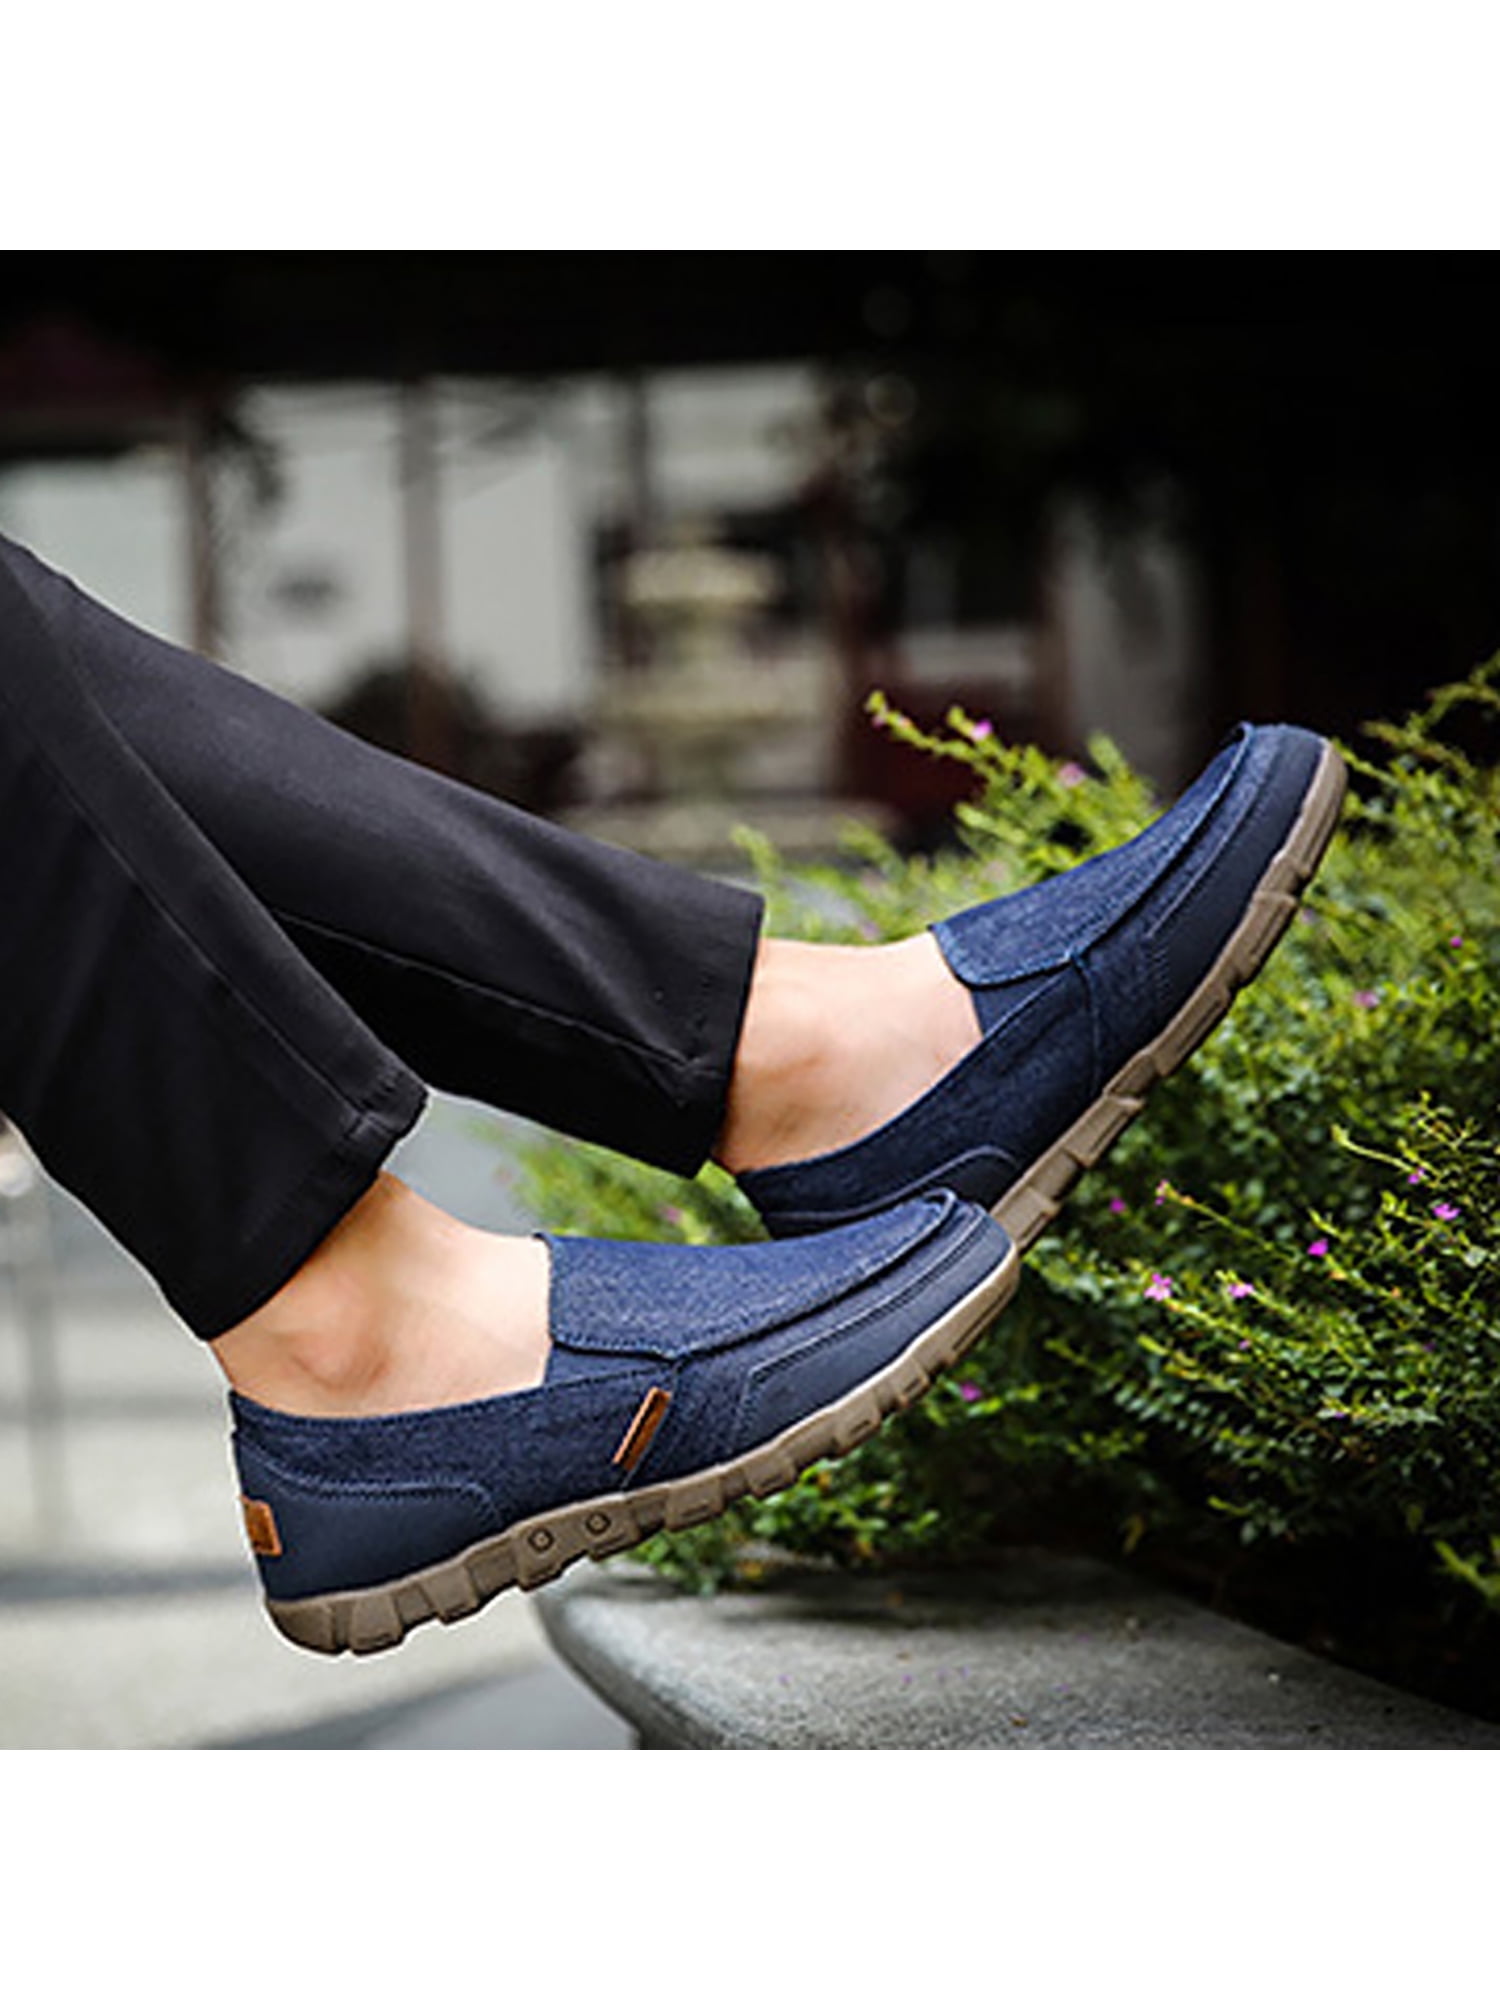 Men Shoes Wide Width Rubber Sole Flat Work Comfortable Slip On Casual ...